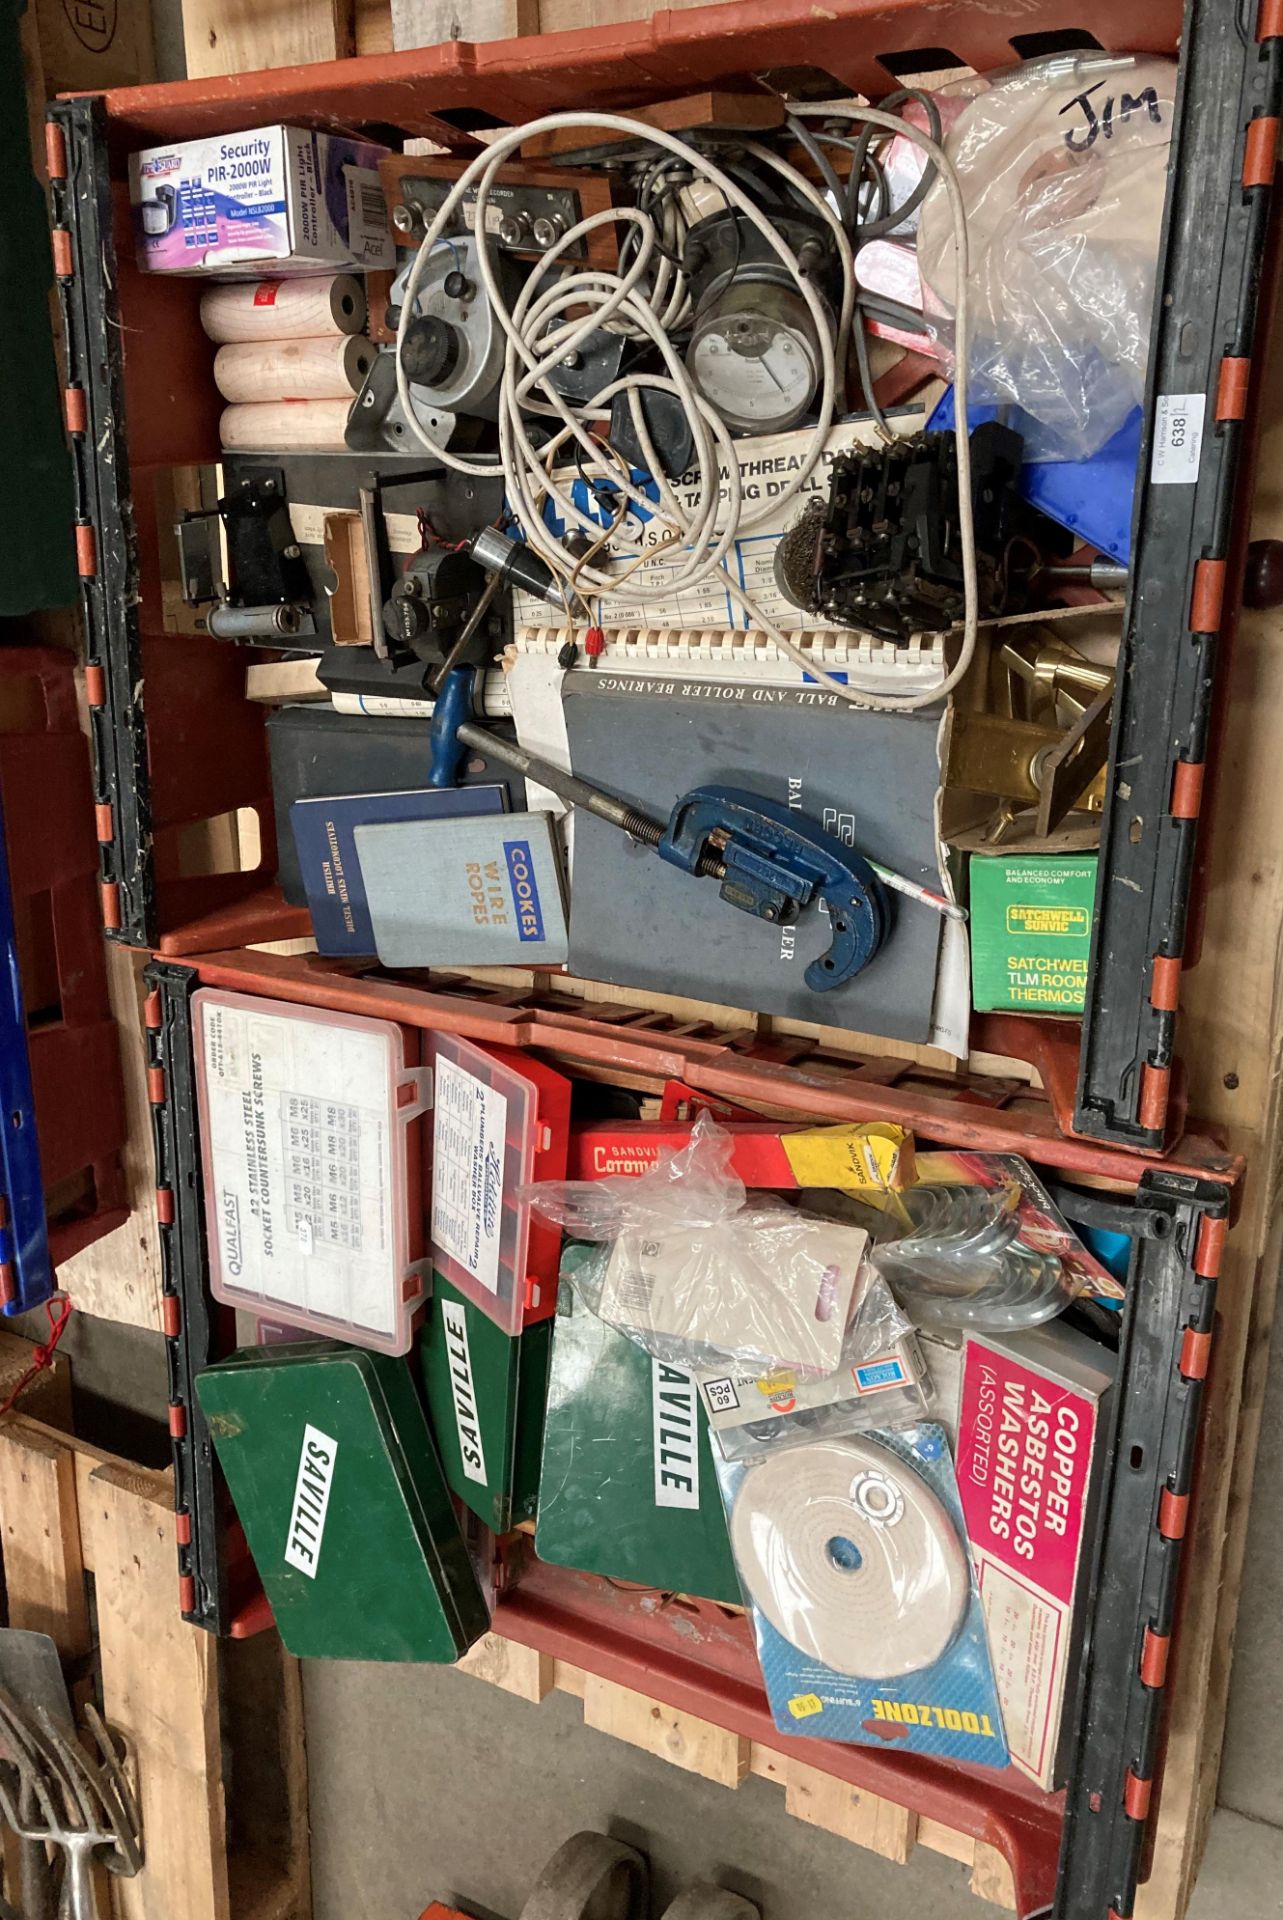 Contents to two red plastic bread crates - assorted electrical components and consumables (please